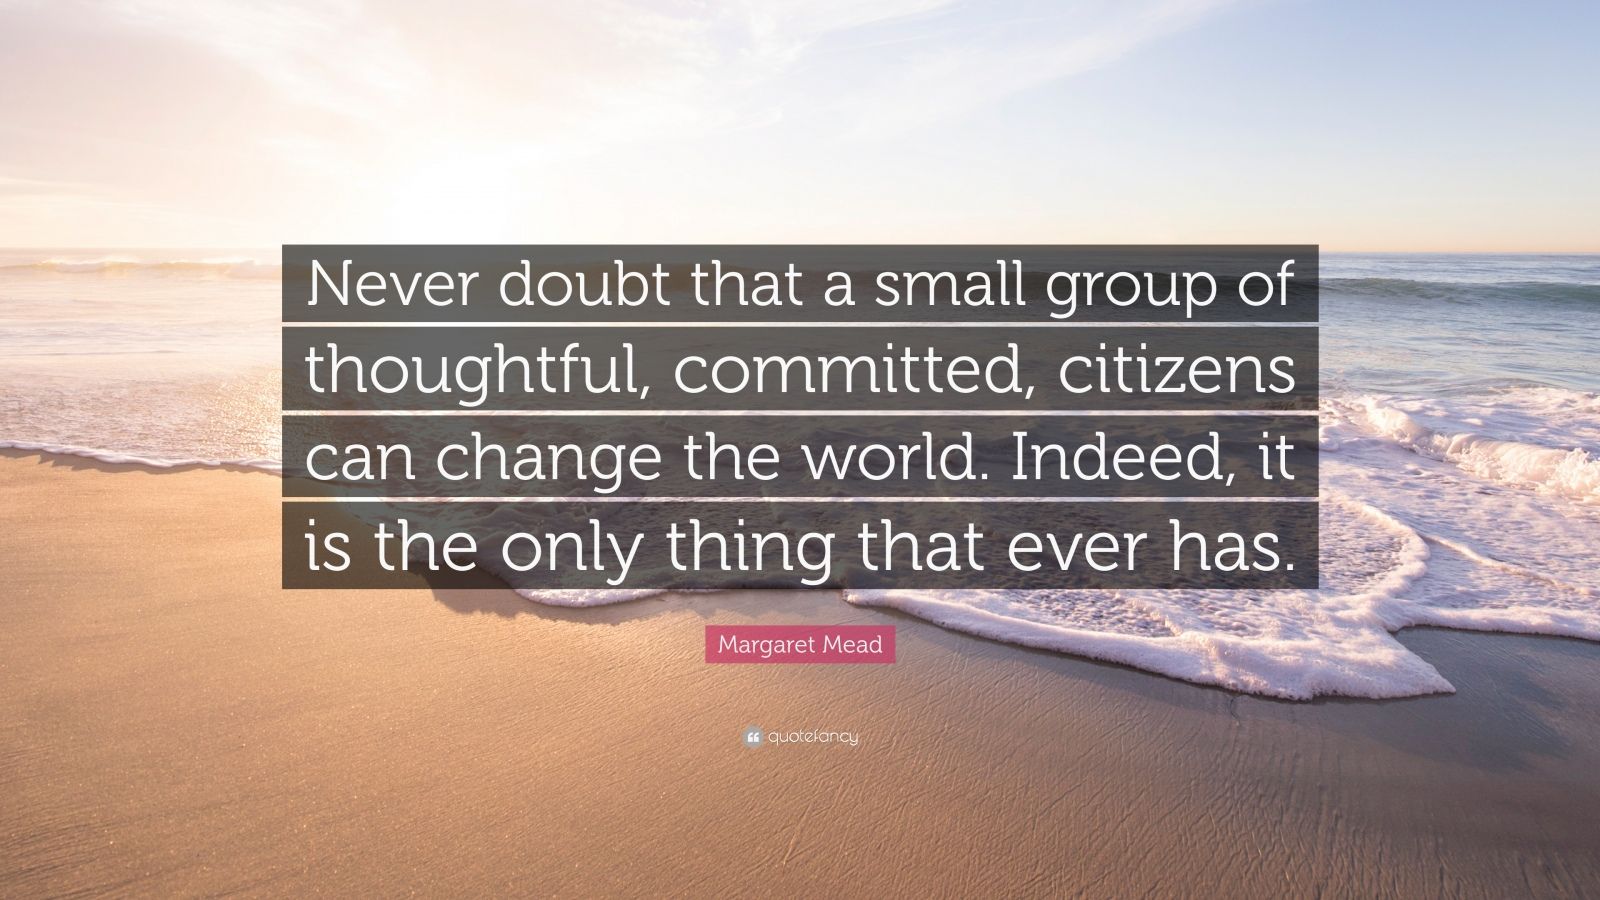 Margaret Mead Quote: “Never doubt that a small group of thoughtful